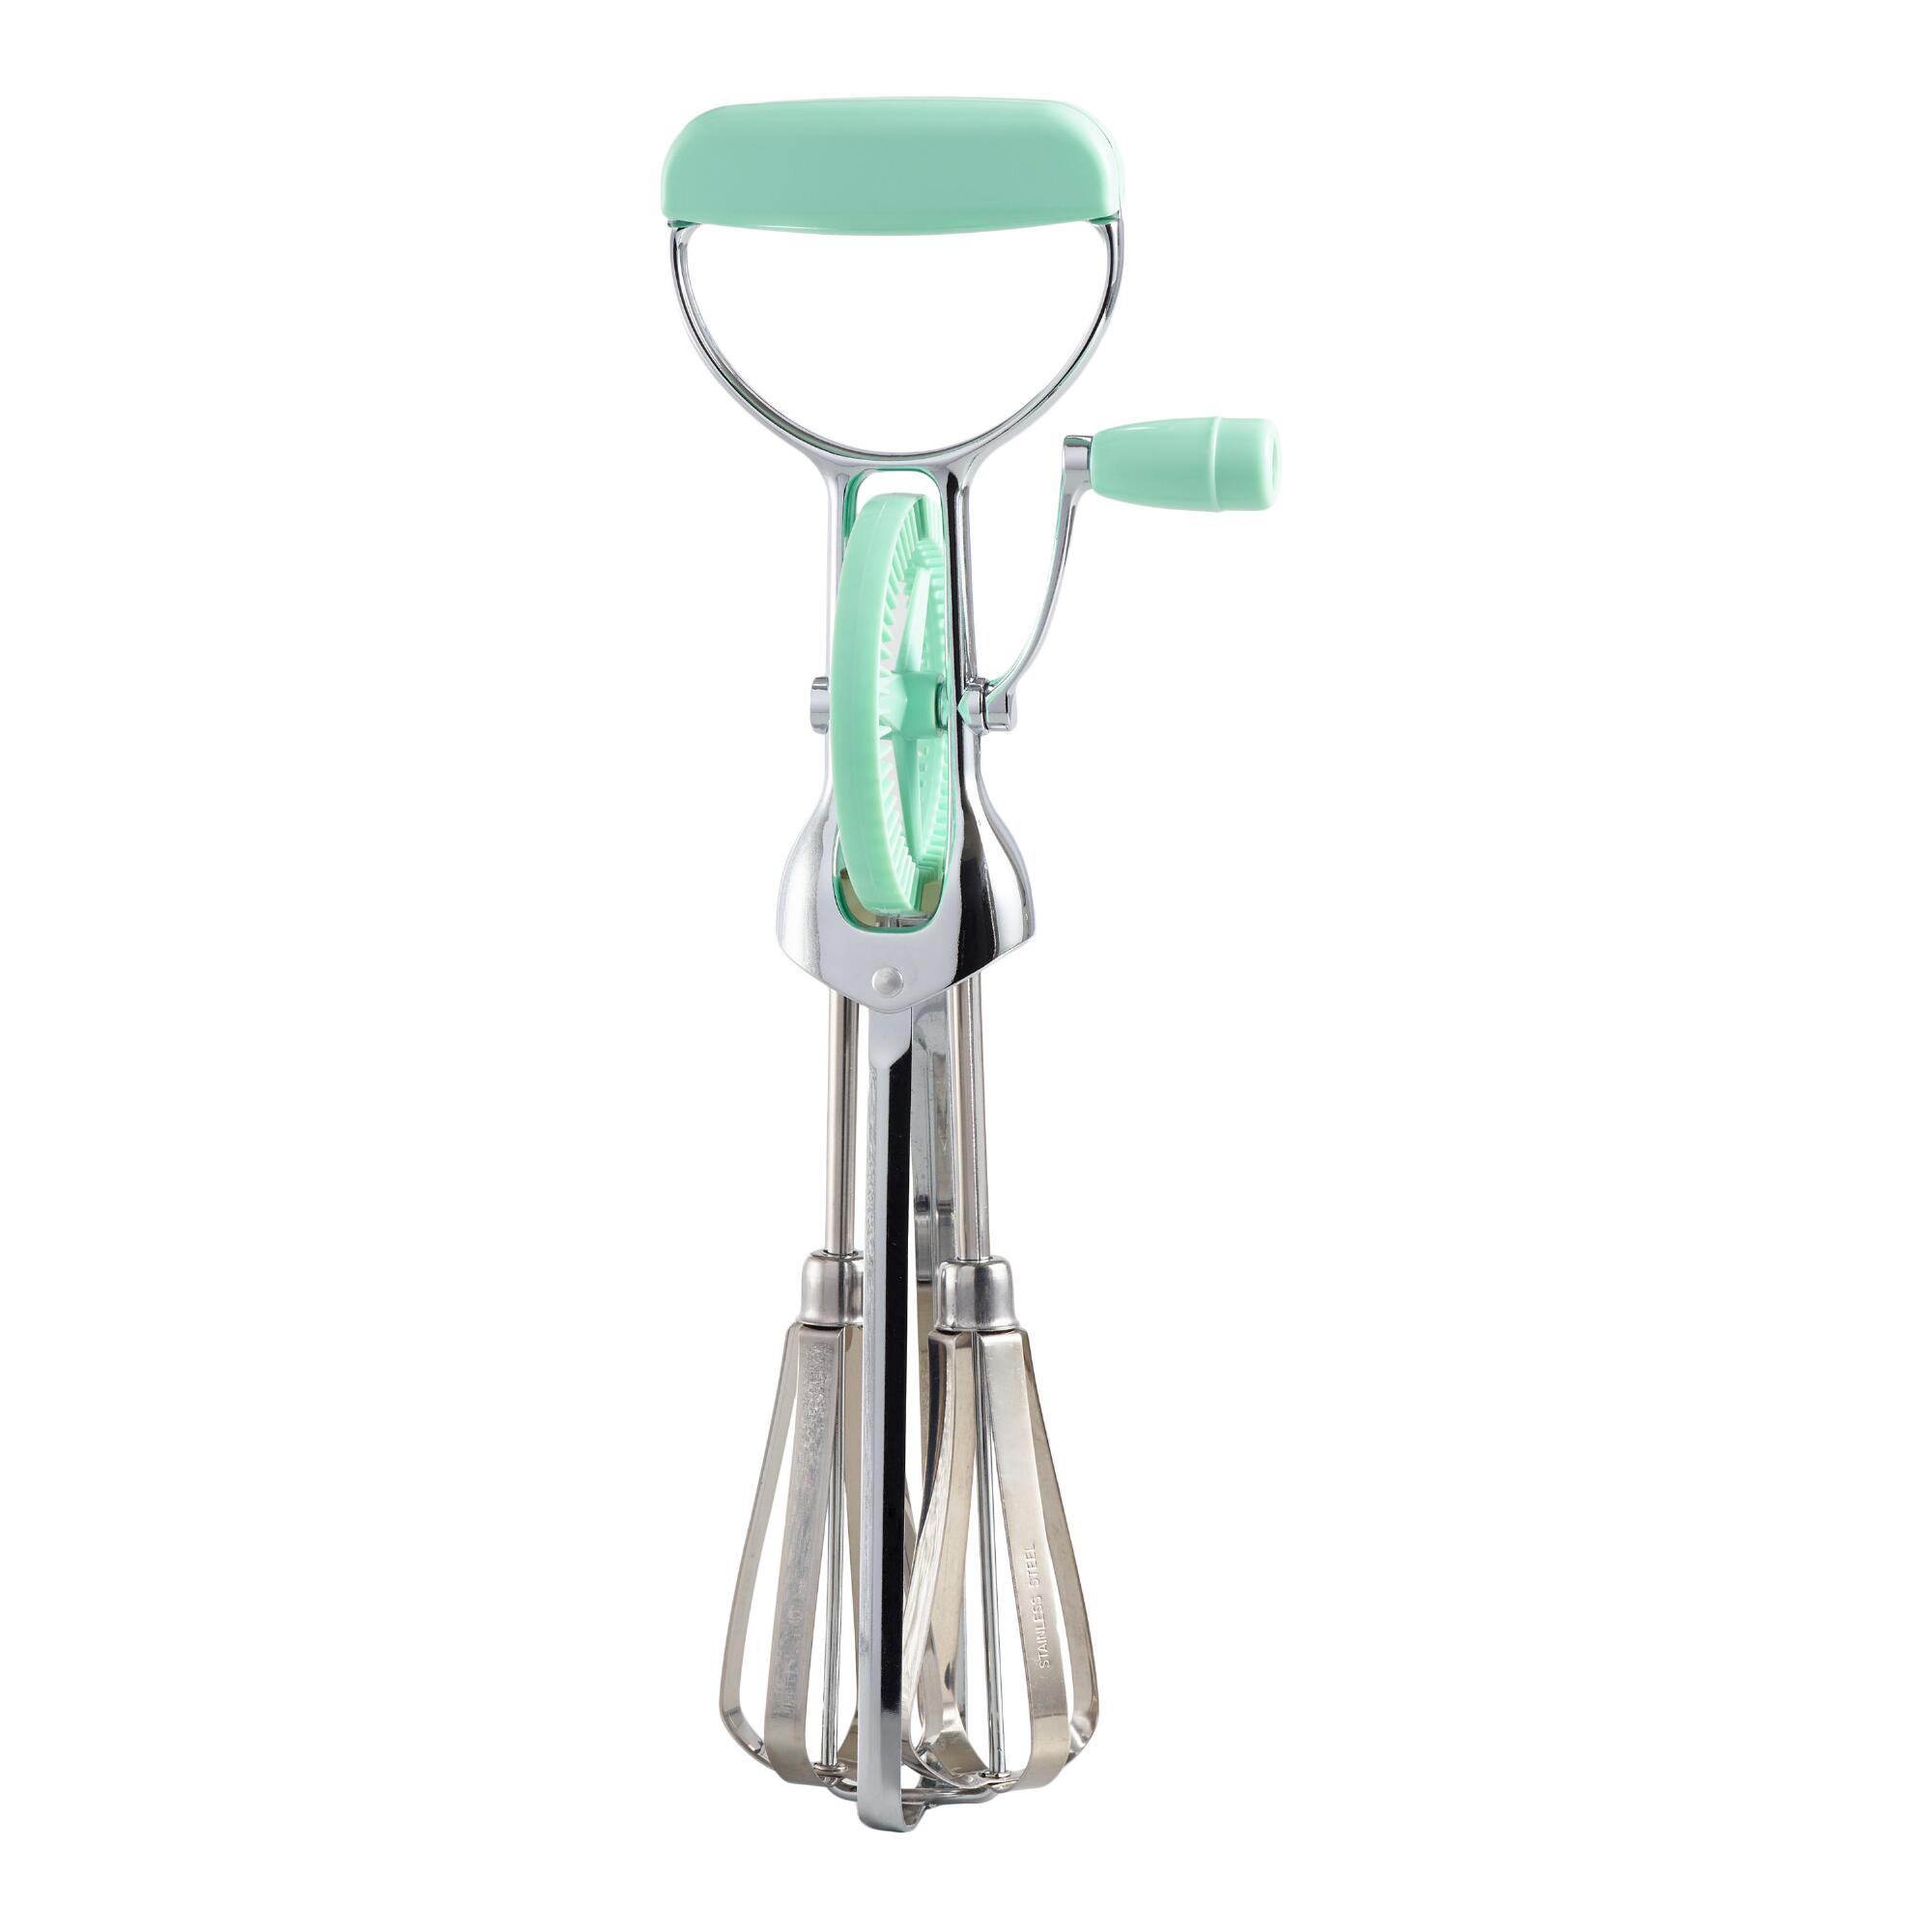 Icy Blue Retro Eggbeater by World Market